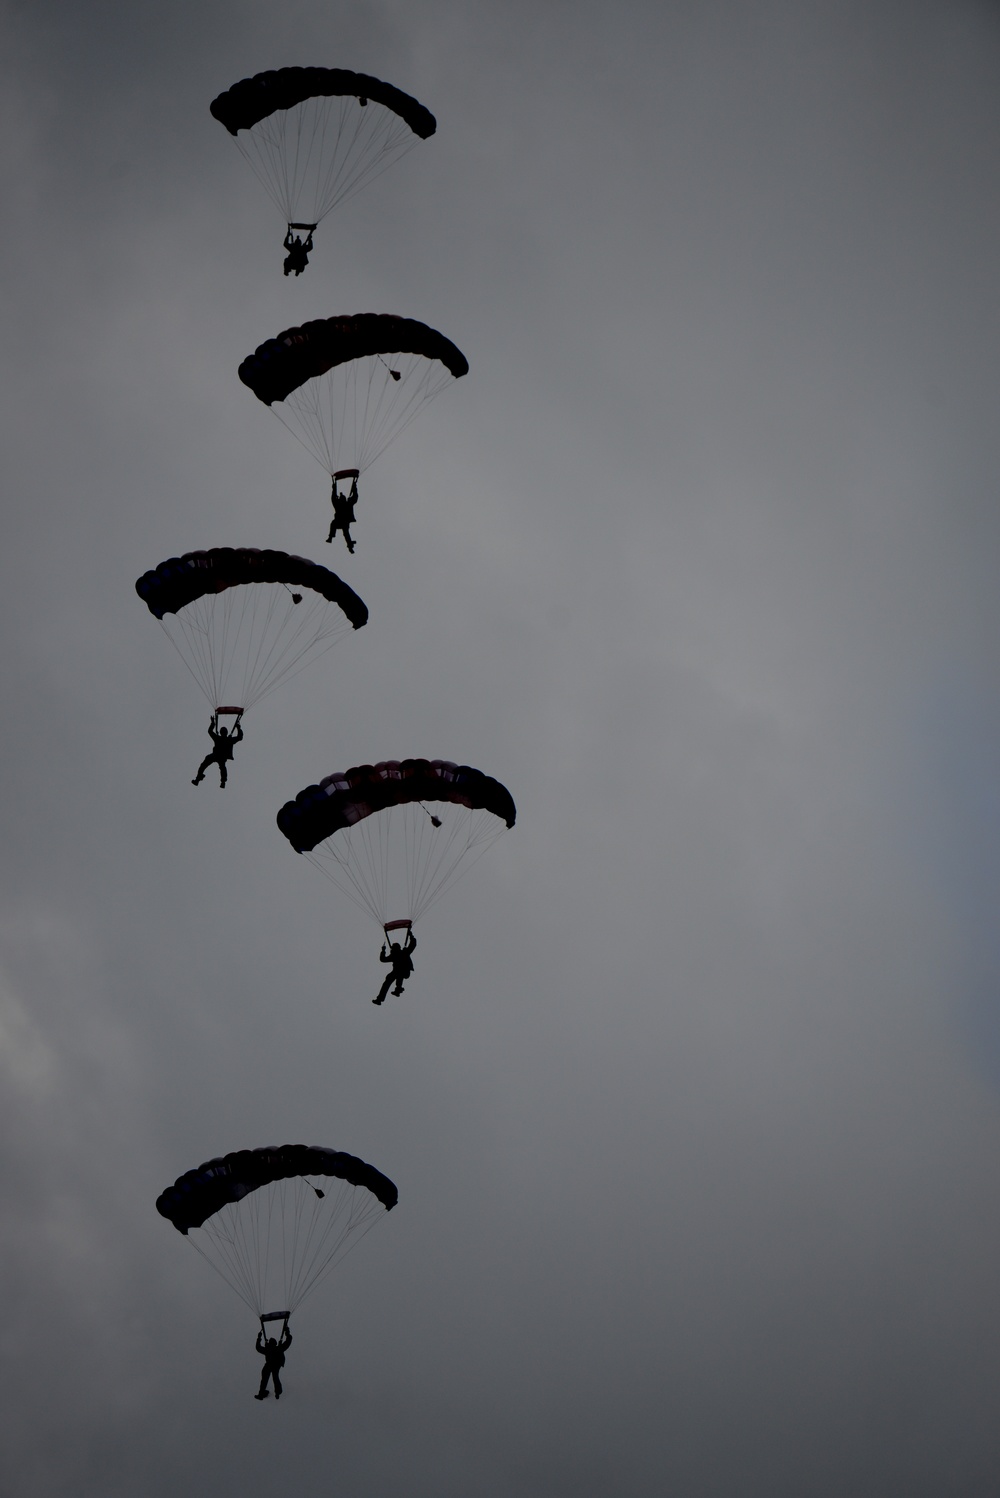 RAF Falcons parachute team lands on RAF Croughton for Independence Day